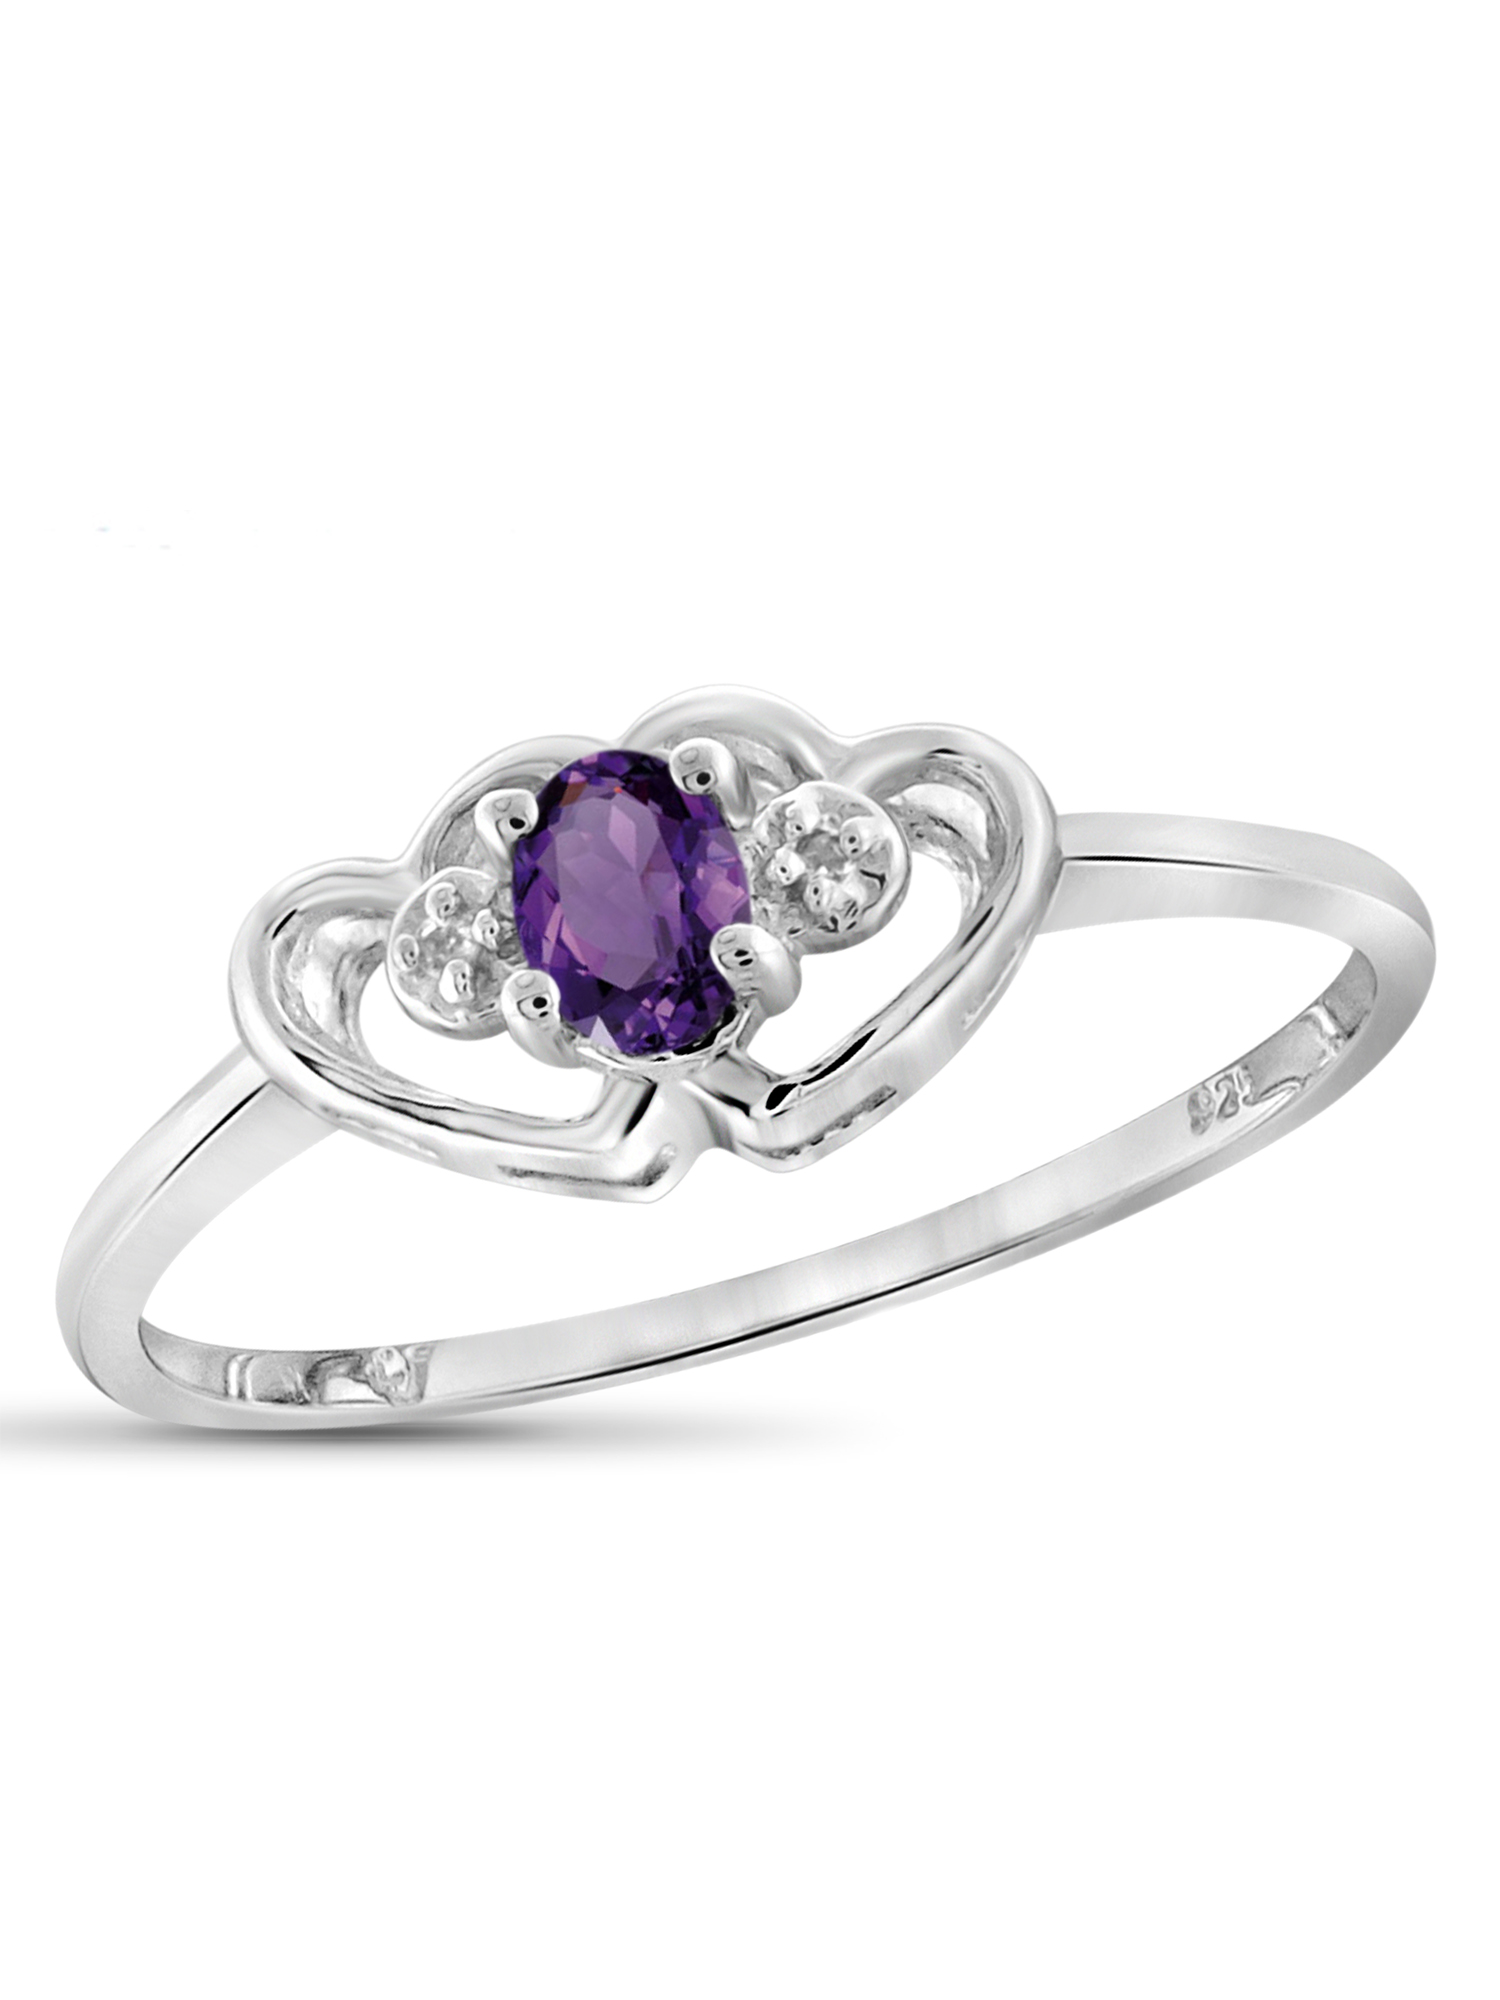 JewelersClub Amethyst Ring Birthstone Jewelry – 0.15 Carat Amethyst 0.925 Sterling Silver Ring Jewelry with White Diamond Accent – Gemstone Rings with Hypoallergenic 0.925 Sterling Silver Band - image 1 of 4